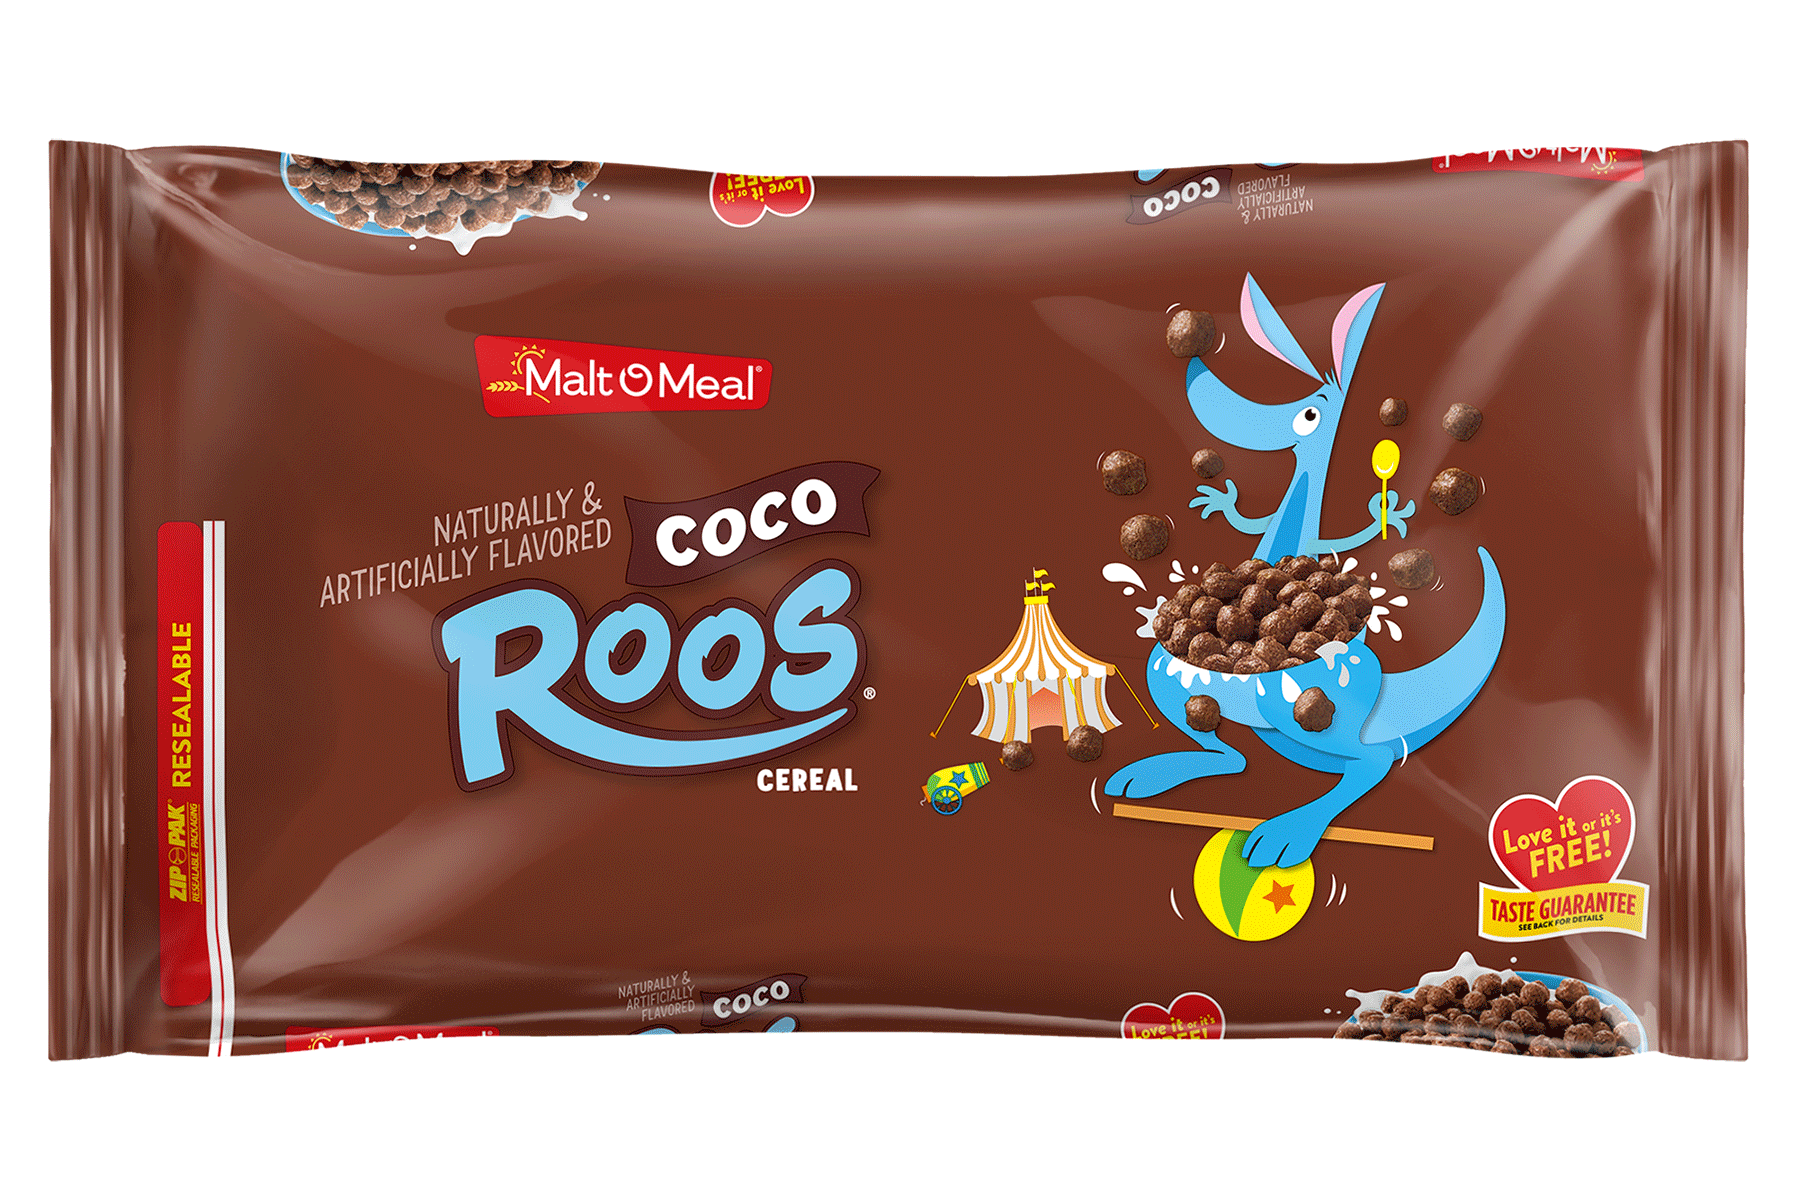 New Malt-O-Meal Coco Roos Cereal Bag